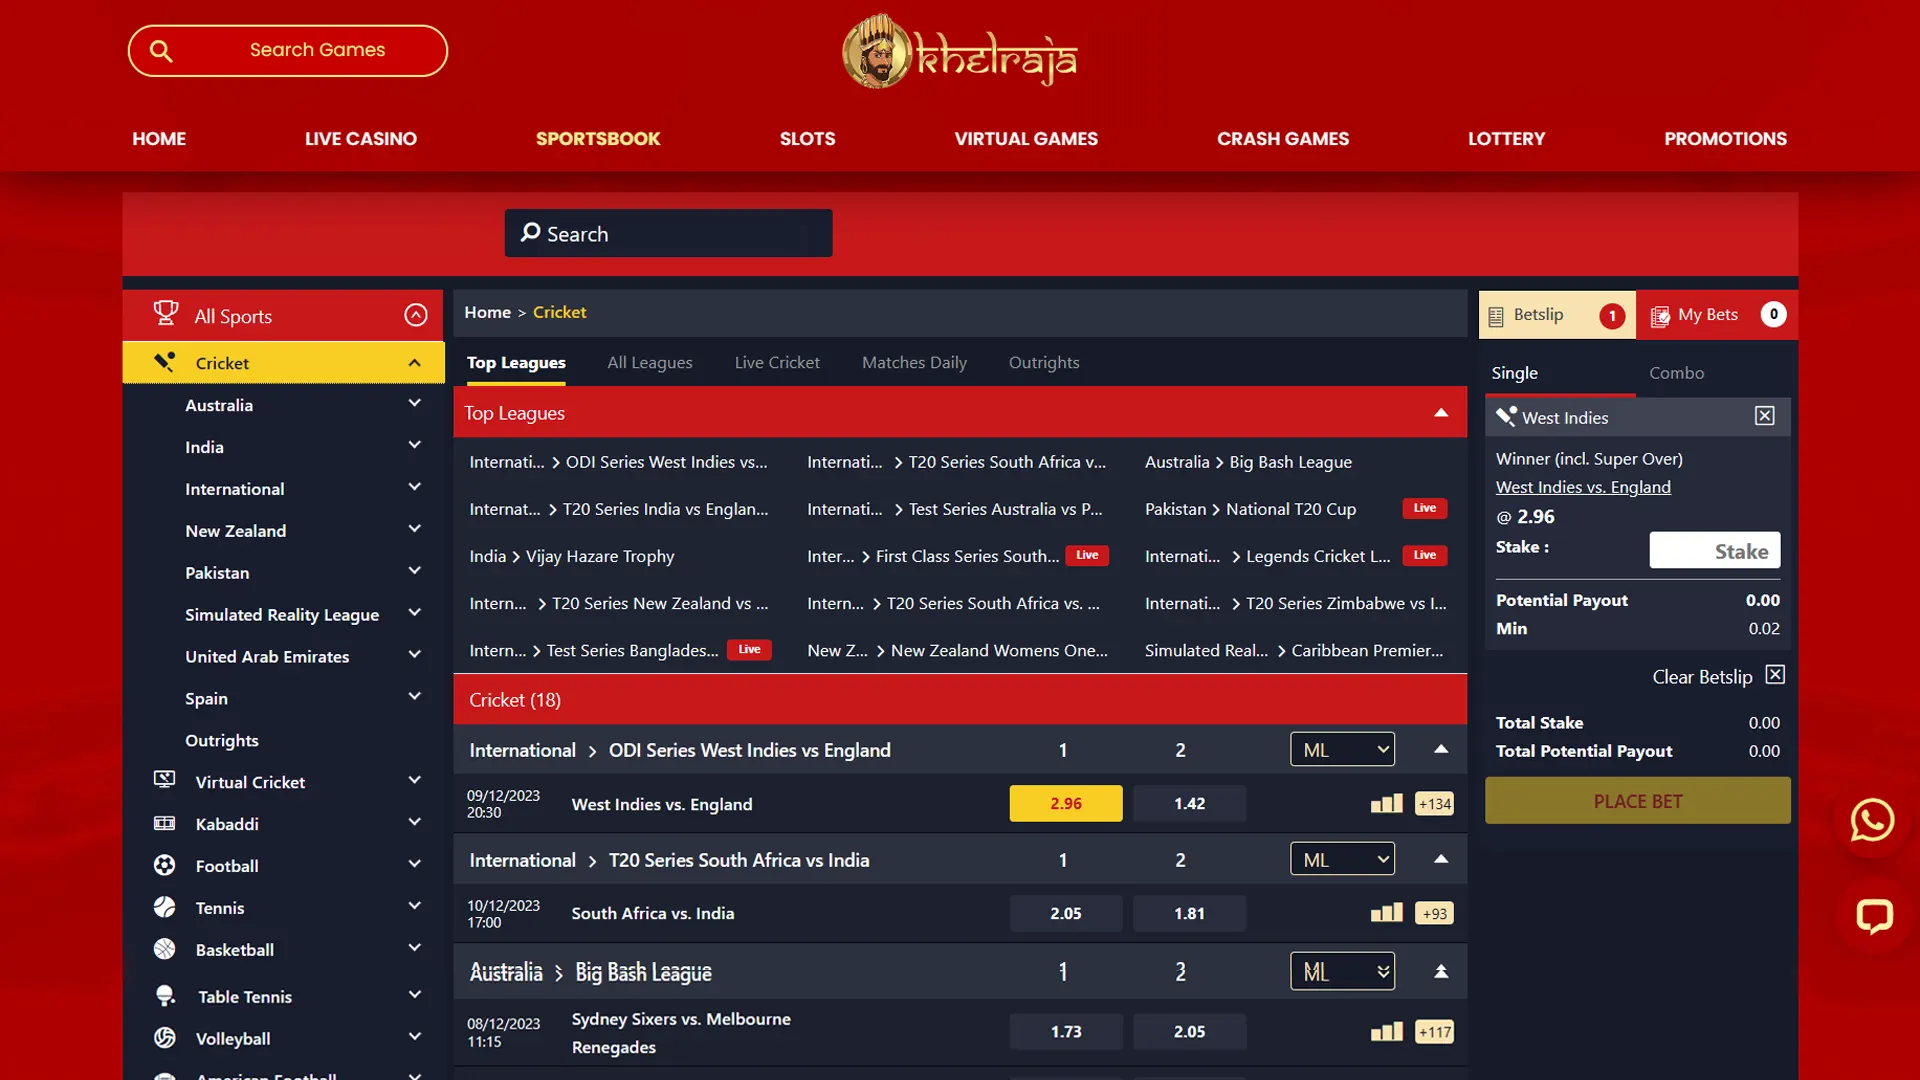 Select a sporting event and place a bet.